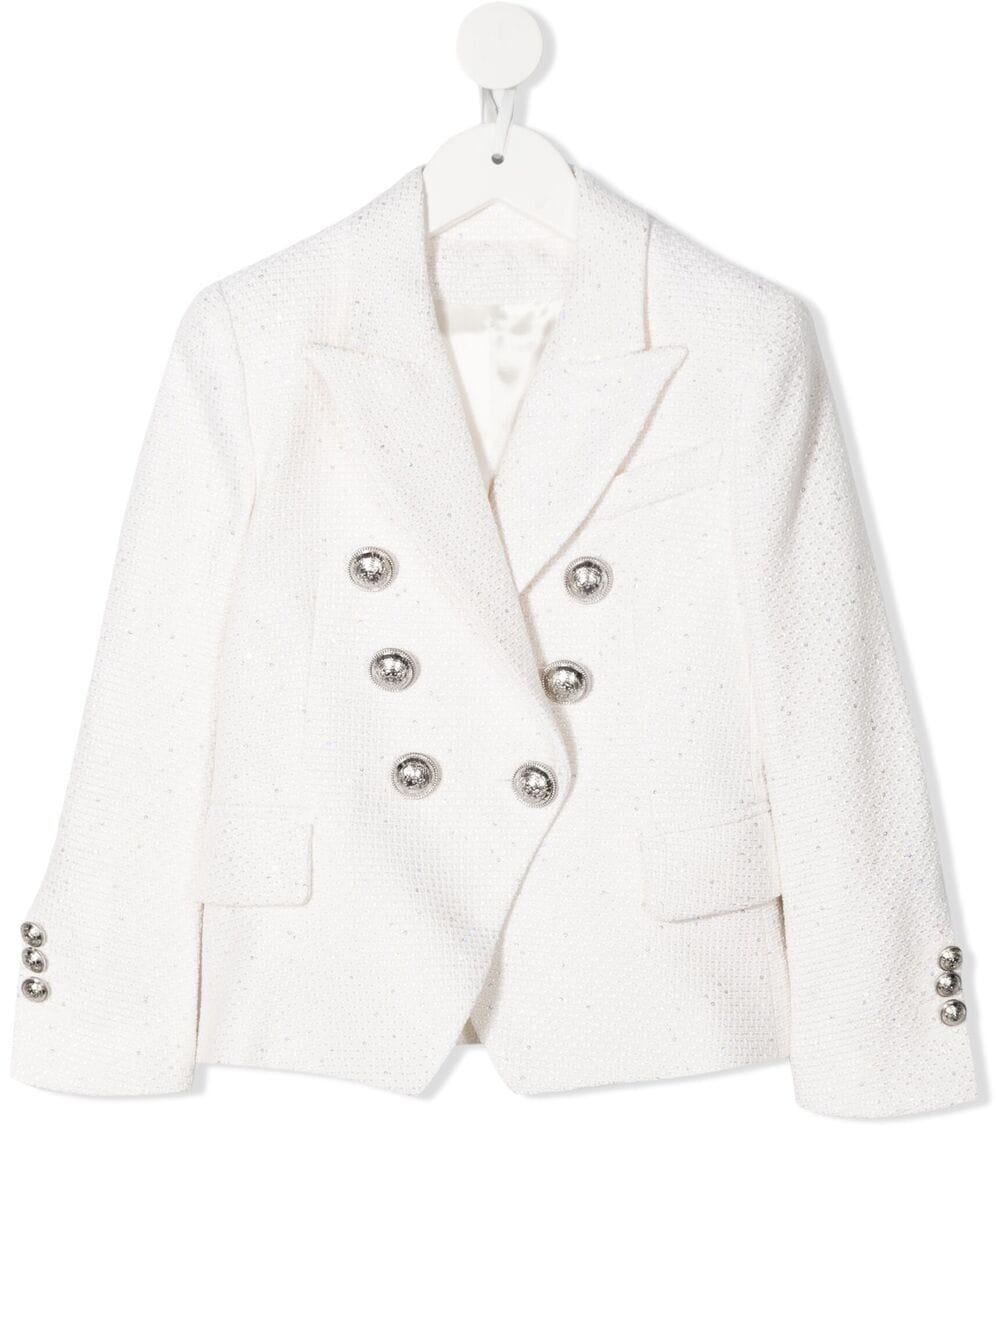 Balmain Kid Double-breasted White Blazer With Silver Buttons